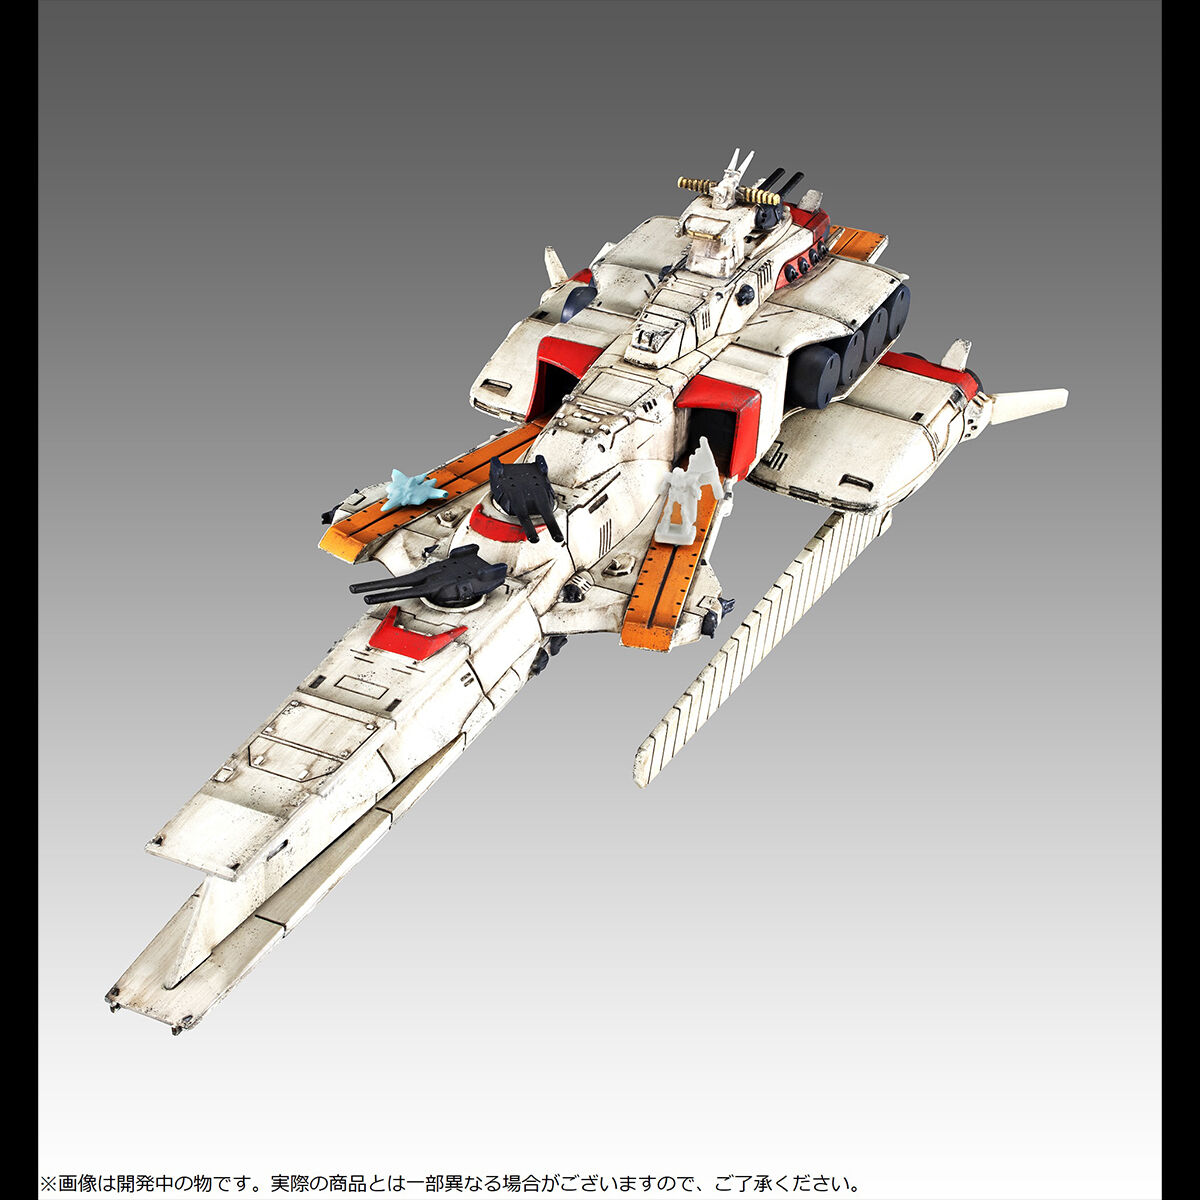 Cosmo Fleet Collection Special G-03 Ra Cailum Class Ra Cailum(Renewal)(Mobile Suit Gundam : Char's Counterattack)